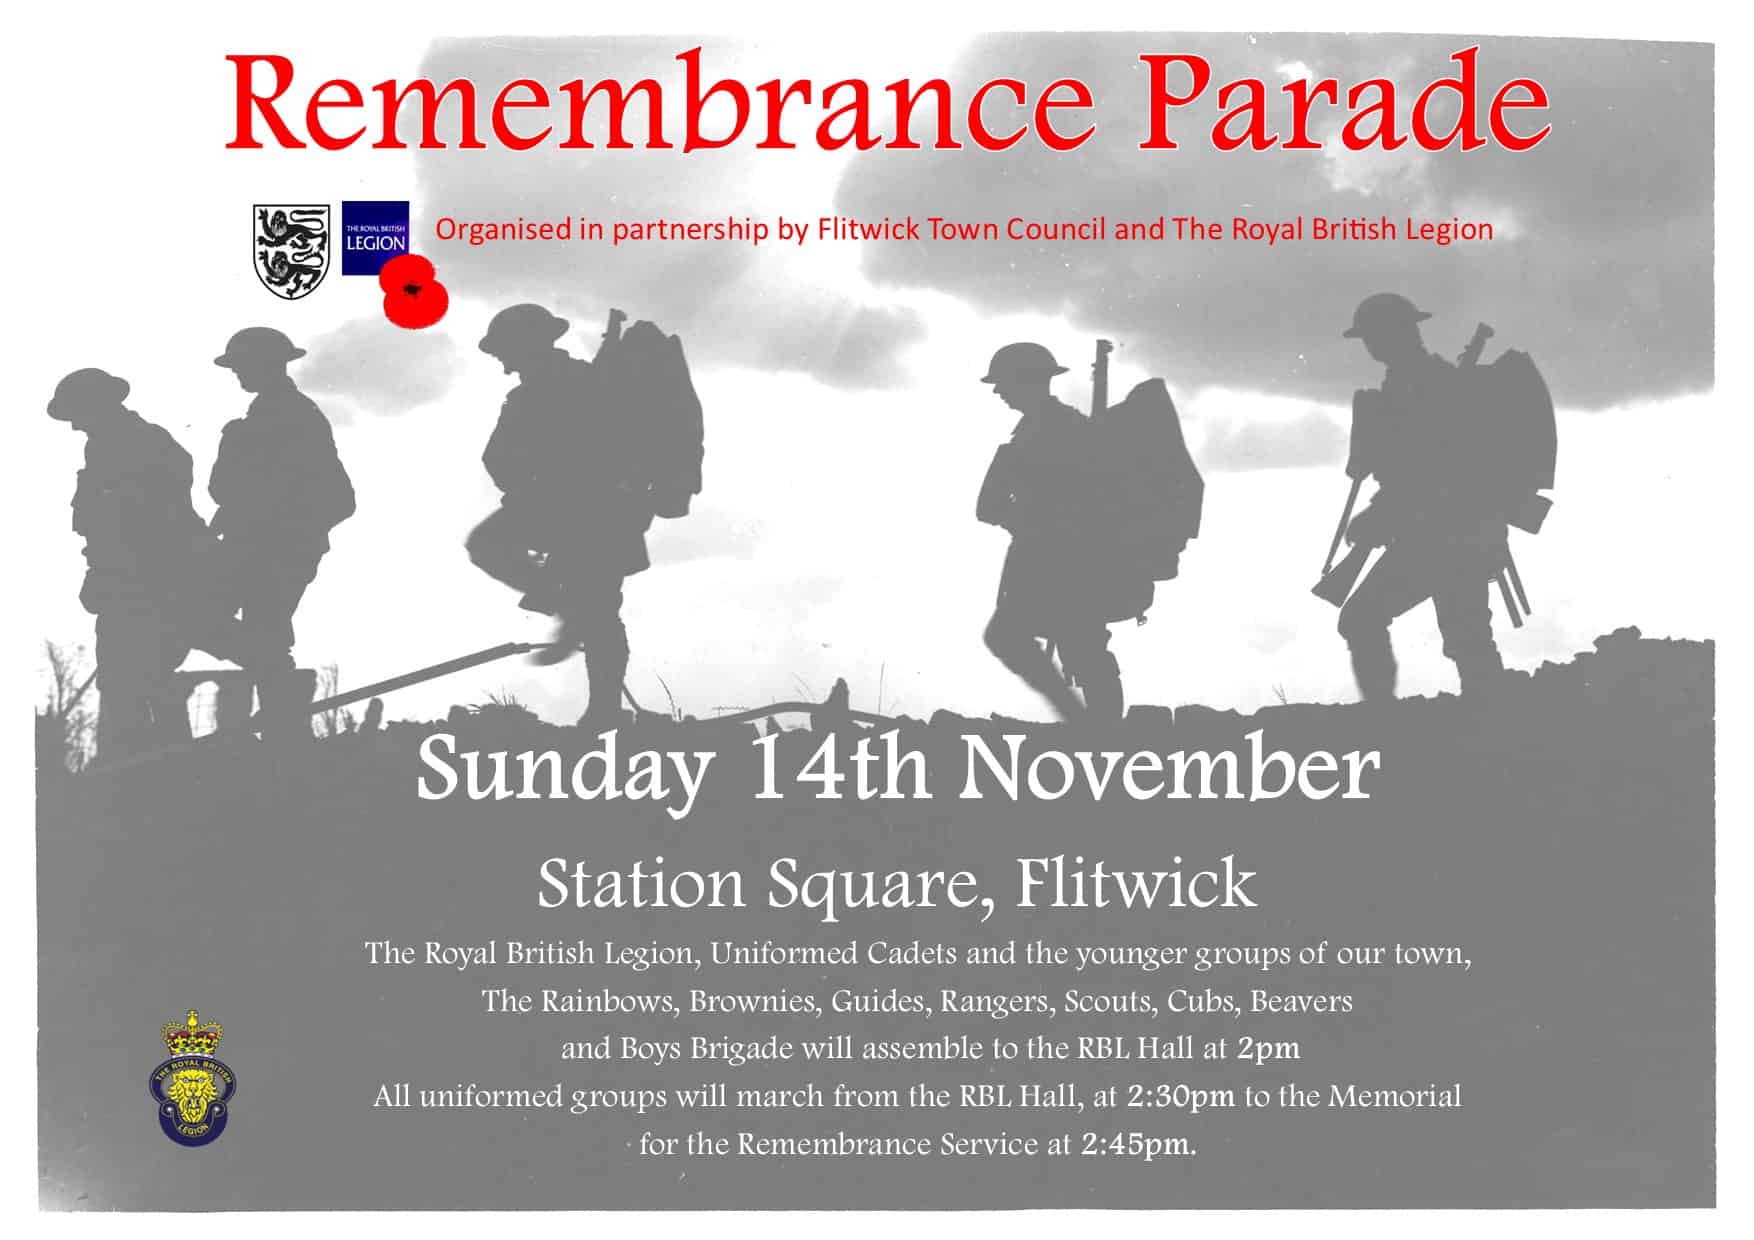 poster promoting remembrance day parade